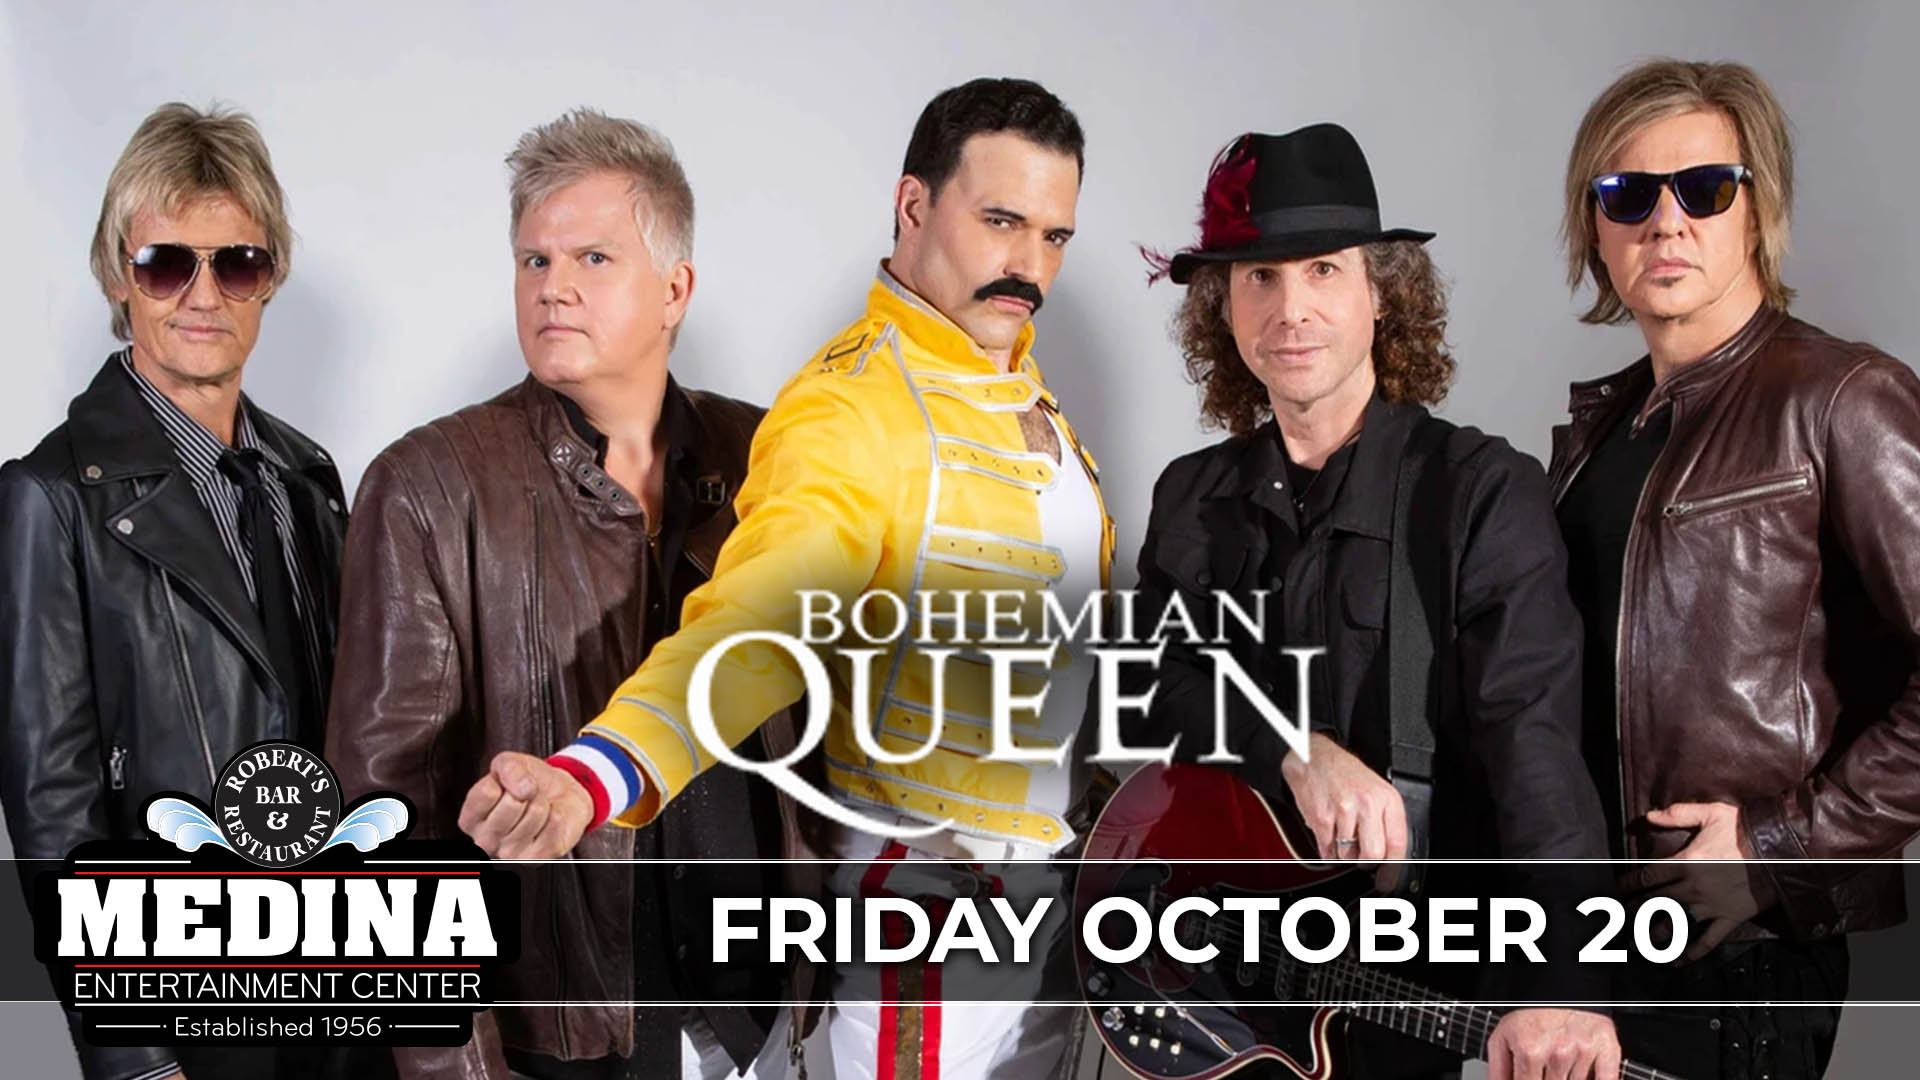 Bohemian Queen All-Star Tribute Band BOHEMIAN QUEEN Medina Entertainment Center Friday, October 20TH, 2023 Doors: 7:30PM | Music: 8:30PM | 21+ Tickets on-sale Friday June 9 at 11am General Seating $28 / Silver Reserved $39 / Gold Reserved $44 - plus applicable fees